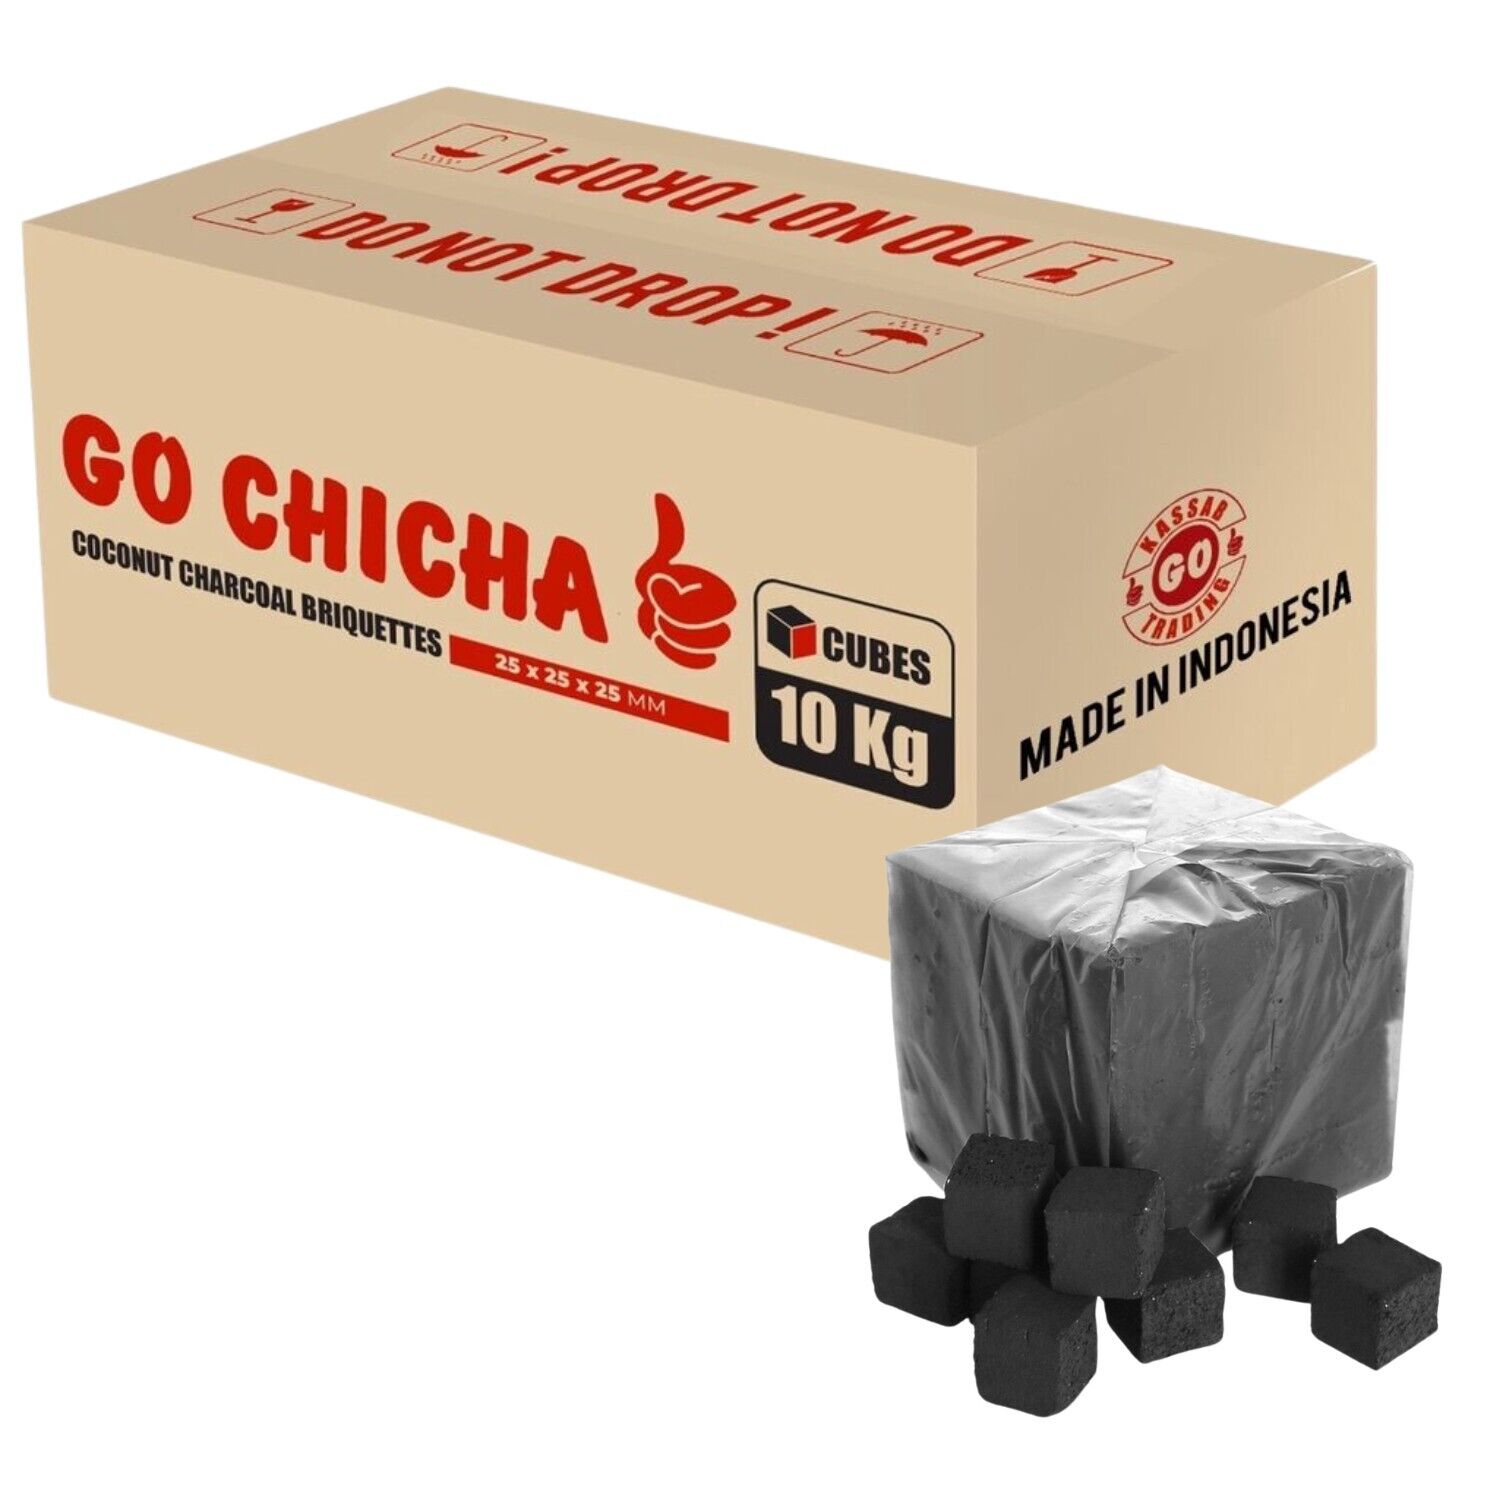 Go Chicha - 2.2lb Pack of Natural Coconut Charcoal Cubes for Hookah (1 Pack)